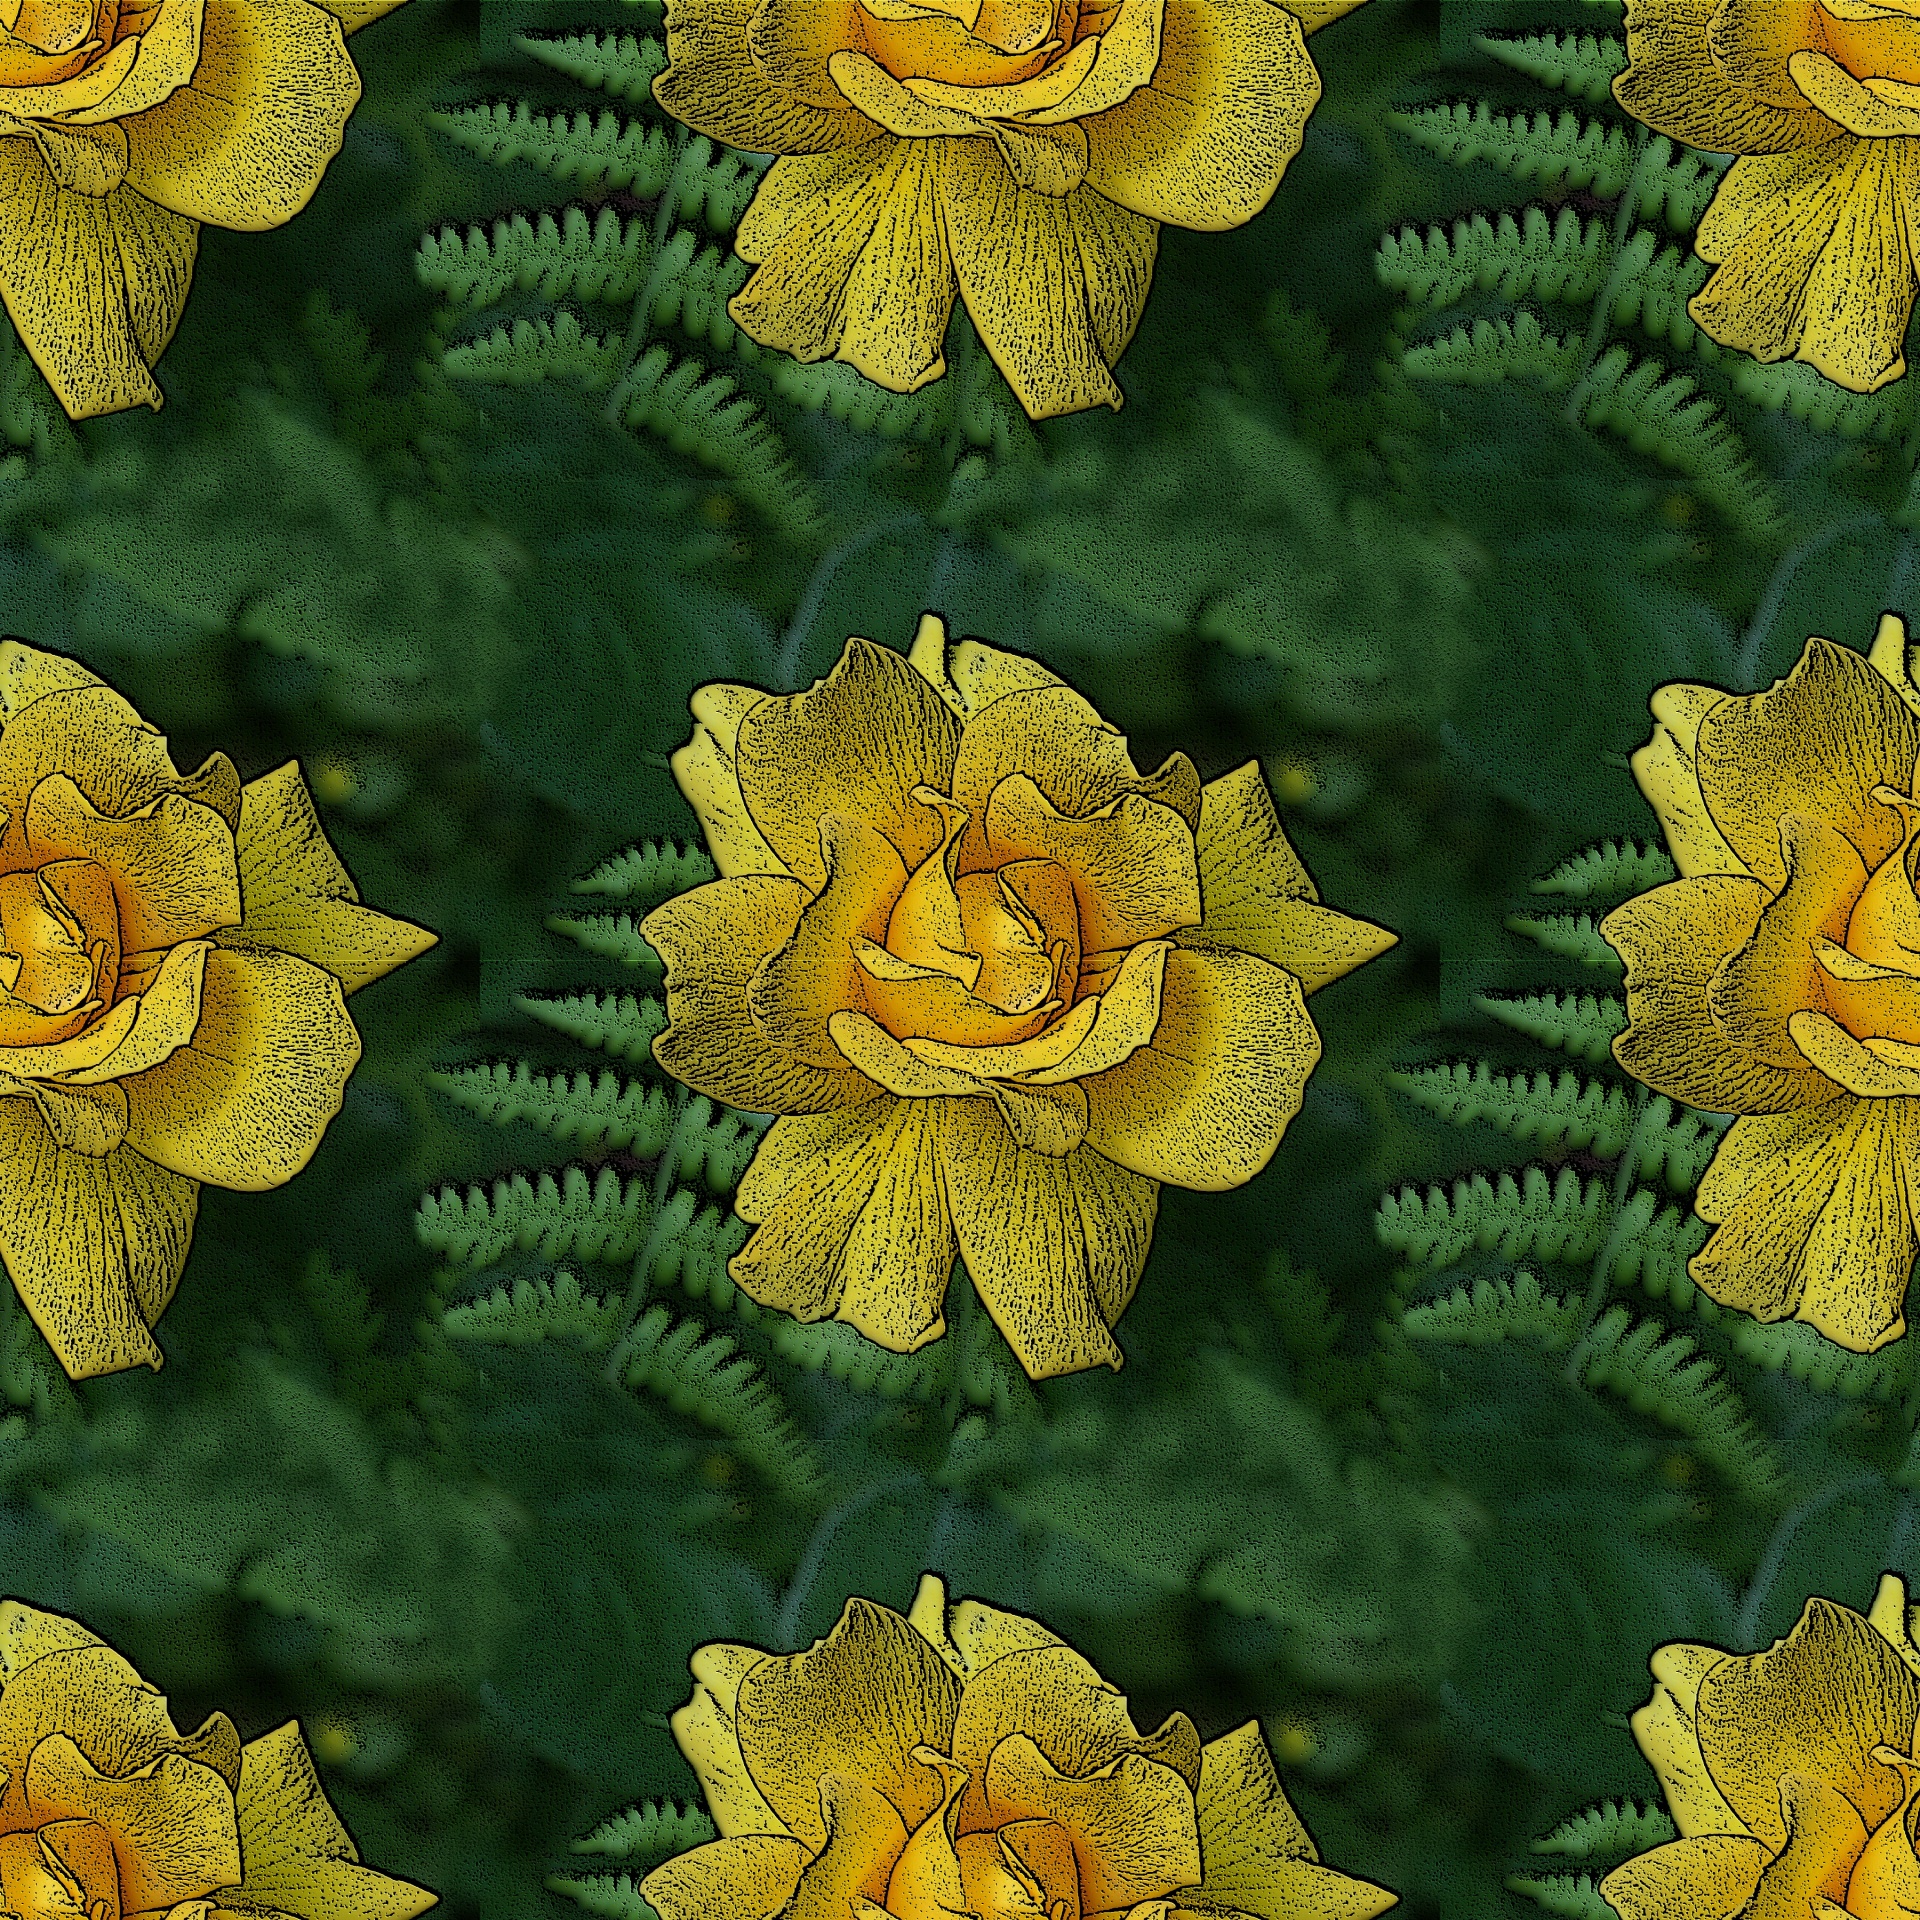 This seamless repeating pattern depicts a yellow rose on a green leaf background. The original photography is enhanced with digital ink sketch techniques.